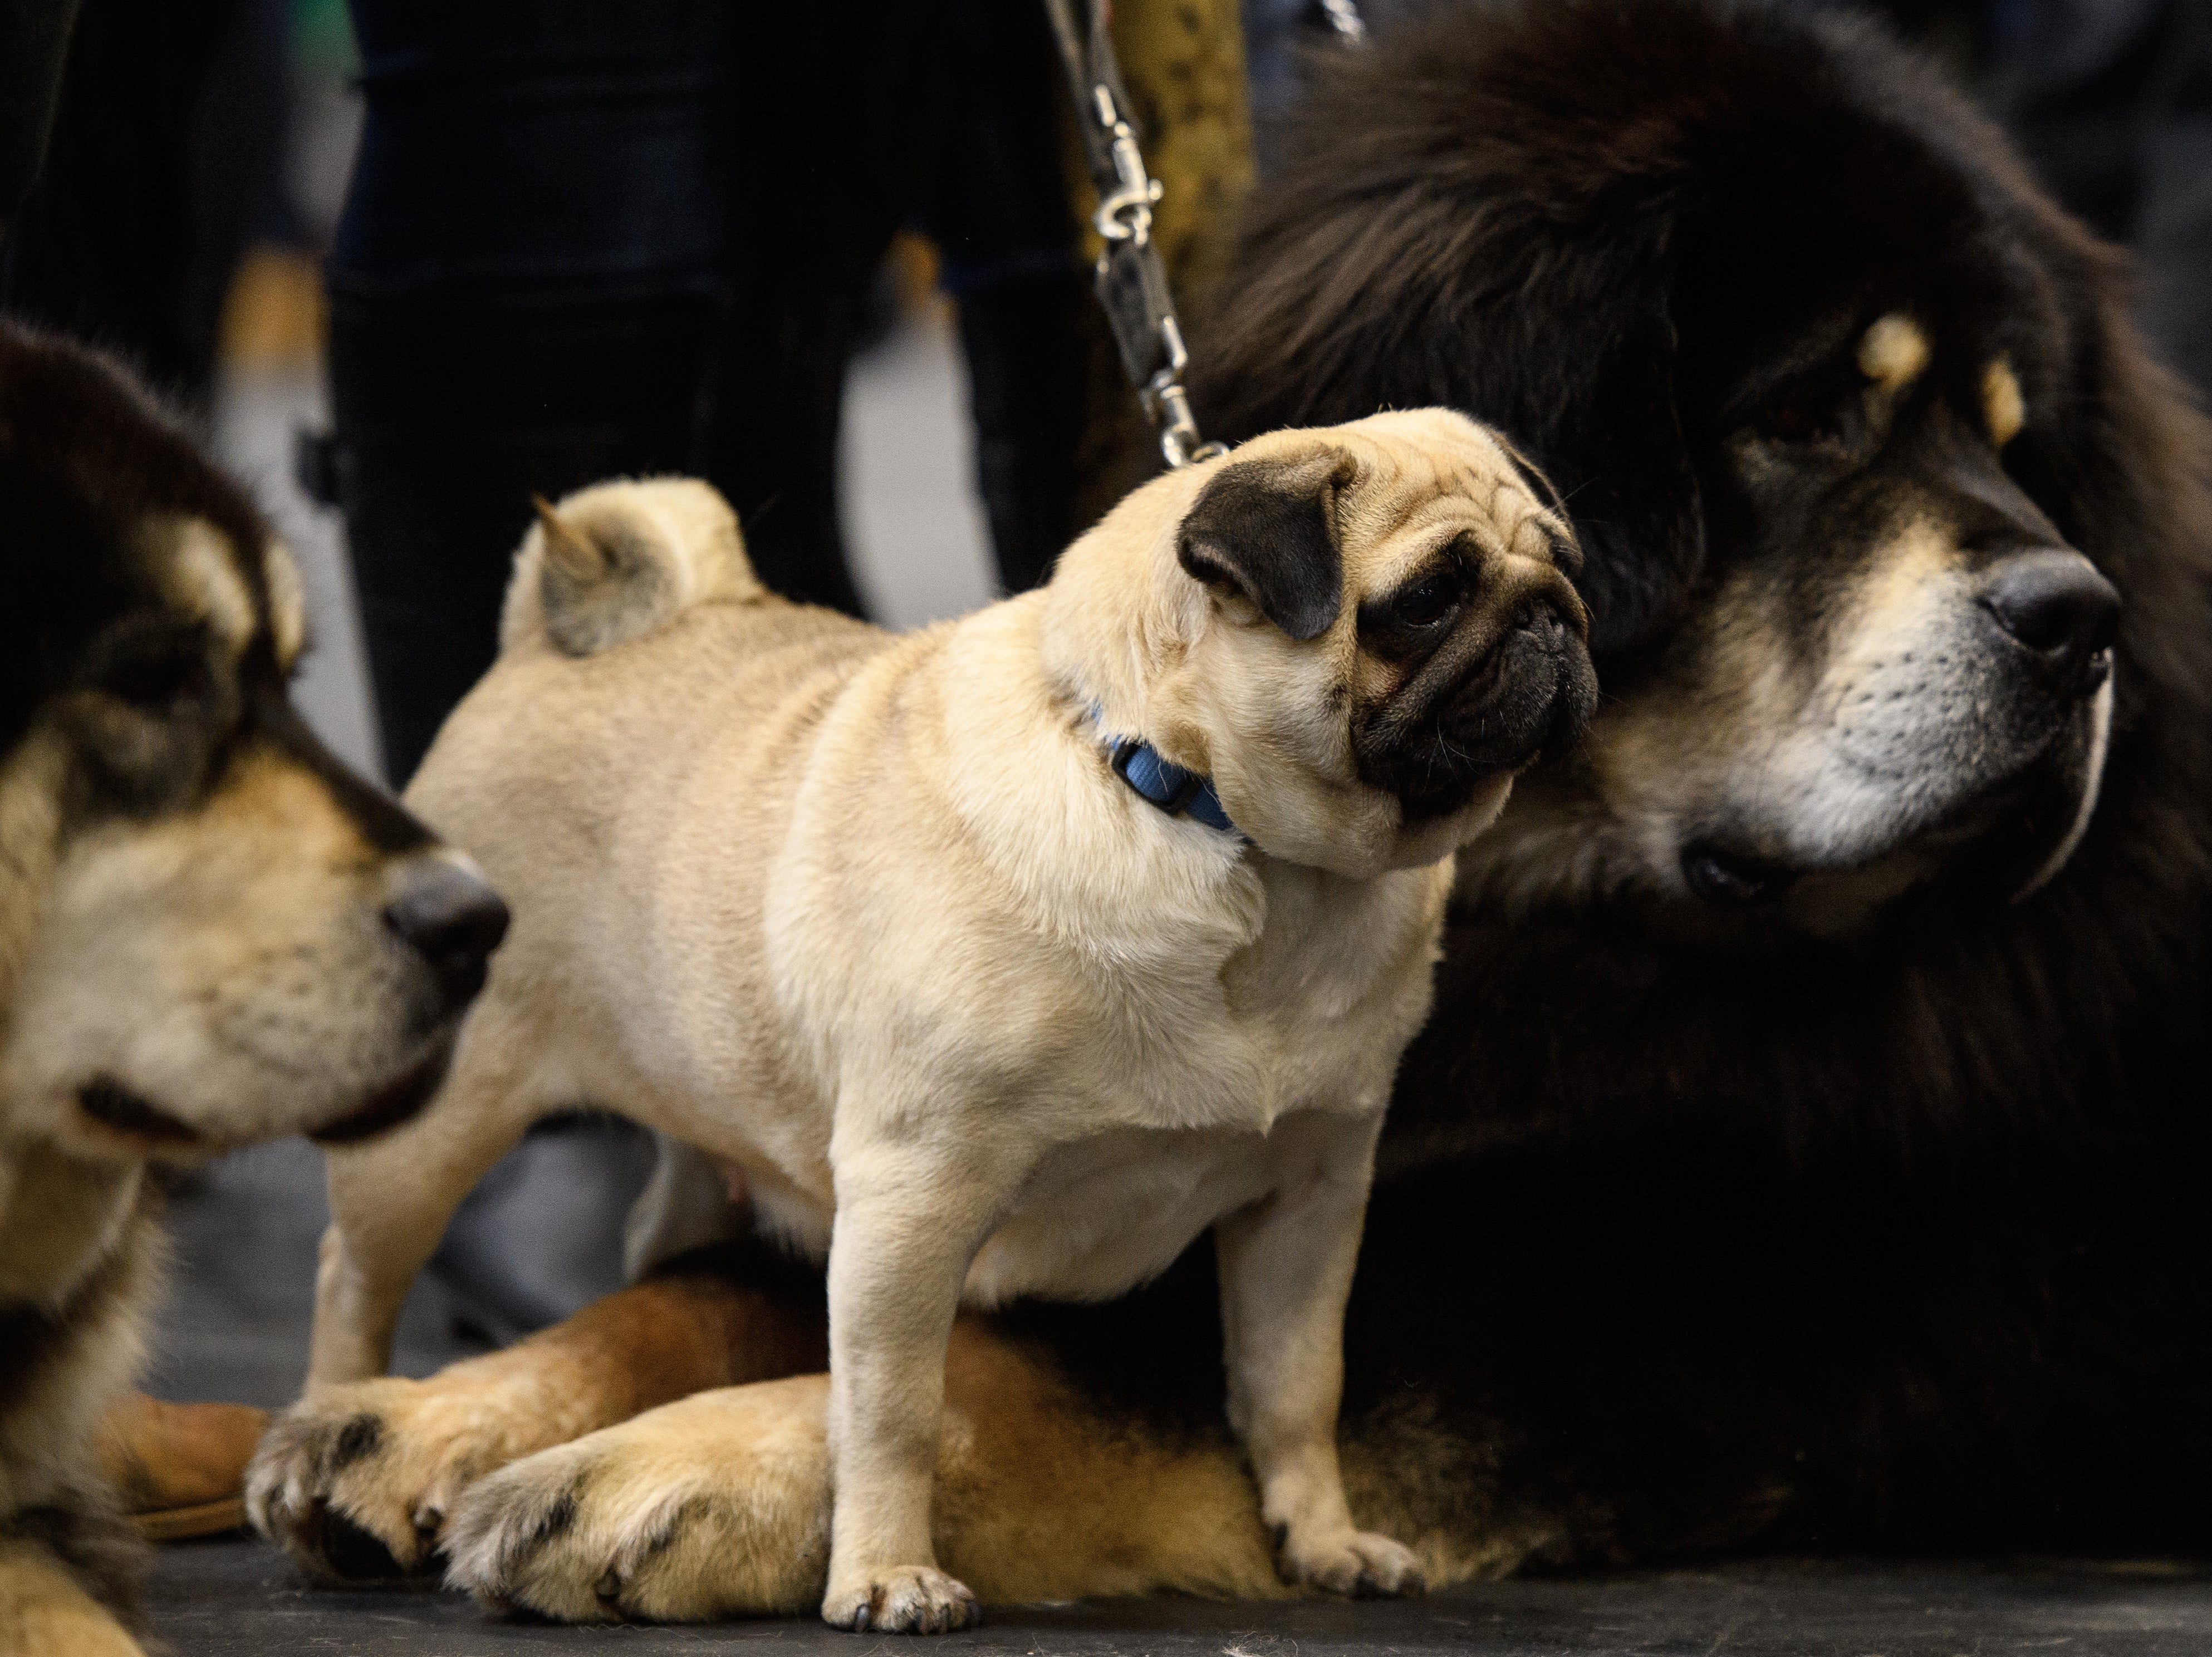 Czkwska the Pug (C) stands between two Tibetan Mastiffs at the Crufts dog show at the NEC Arena on March 8, 2018